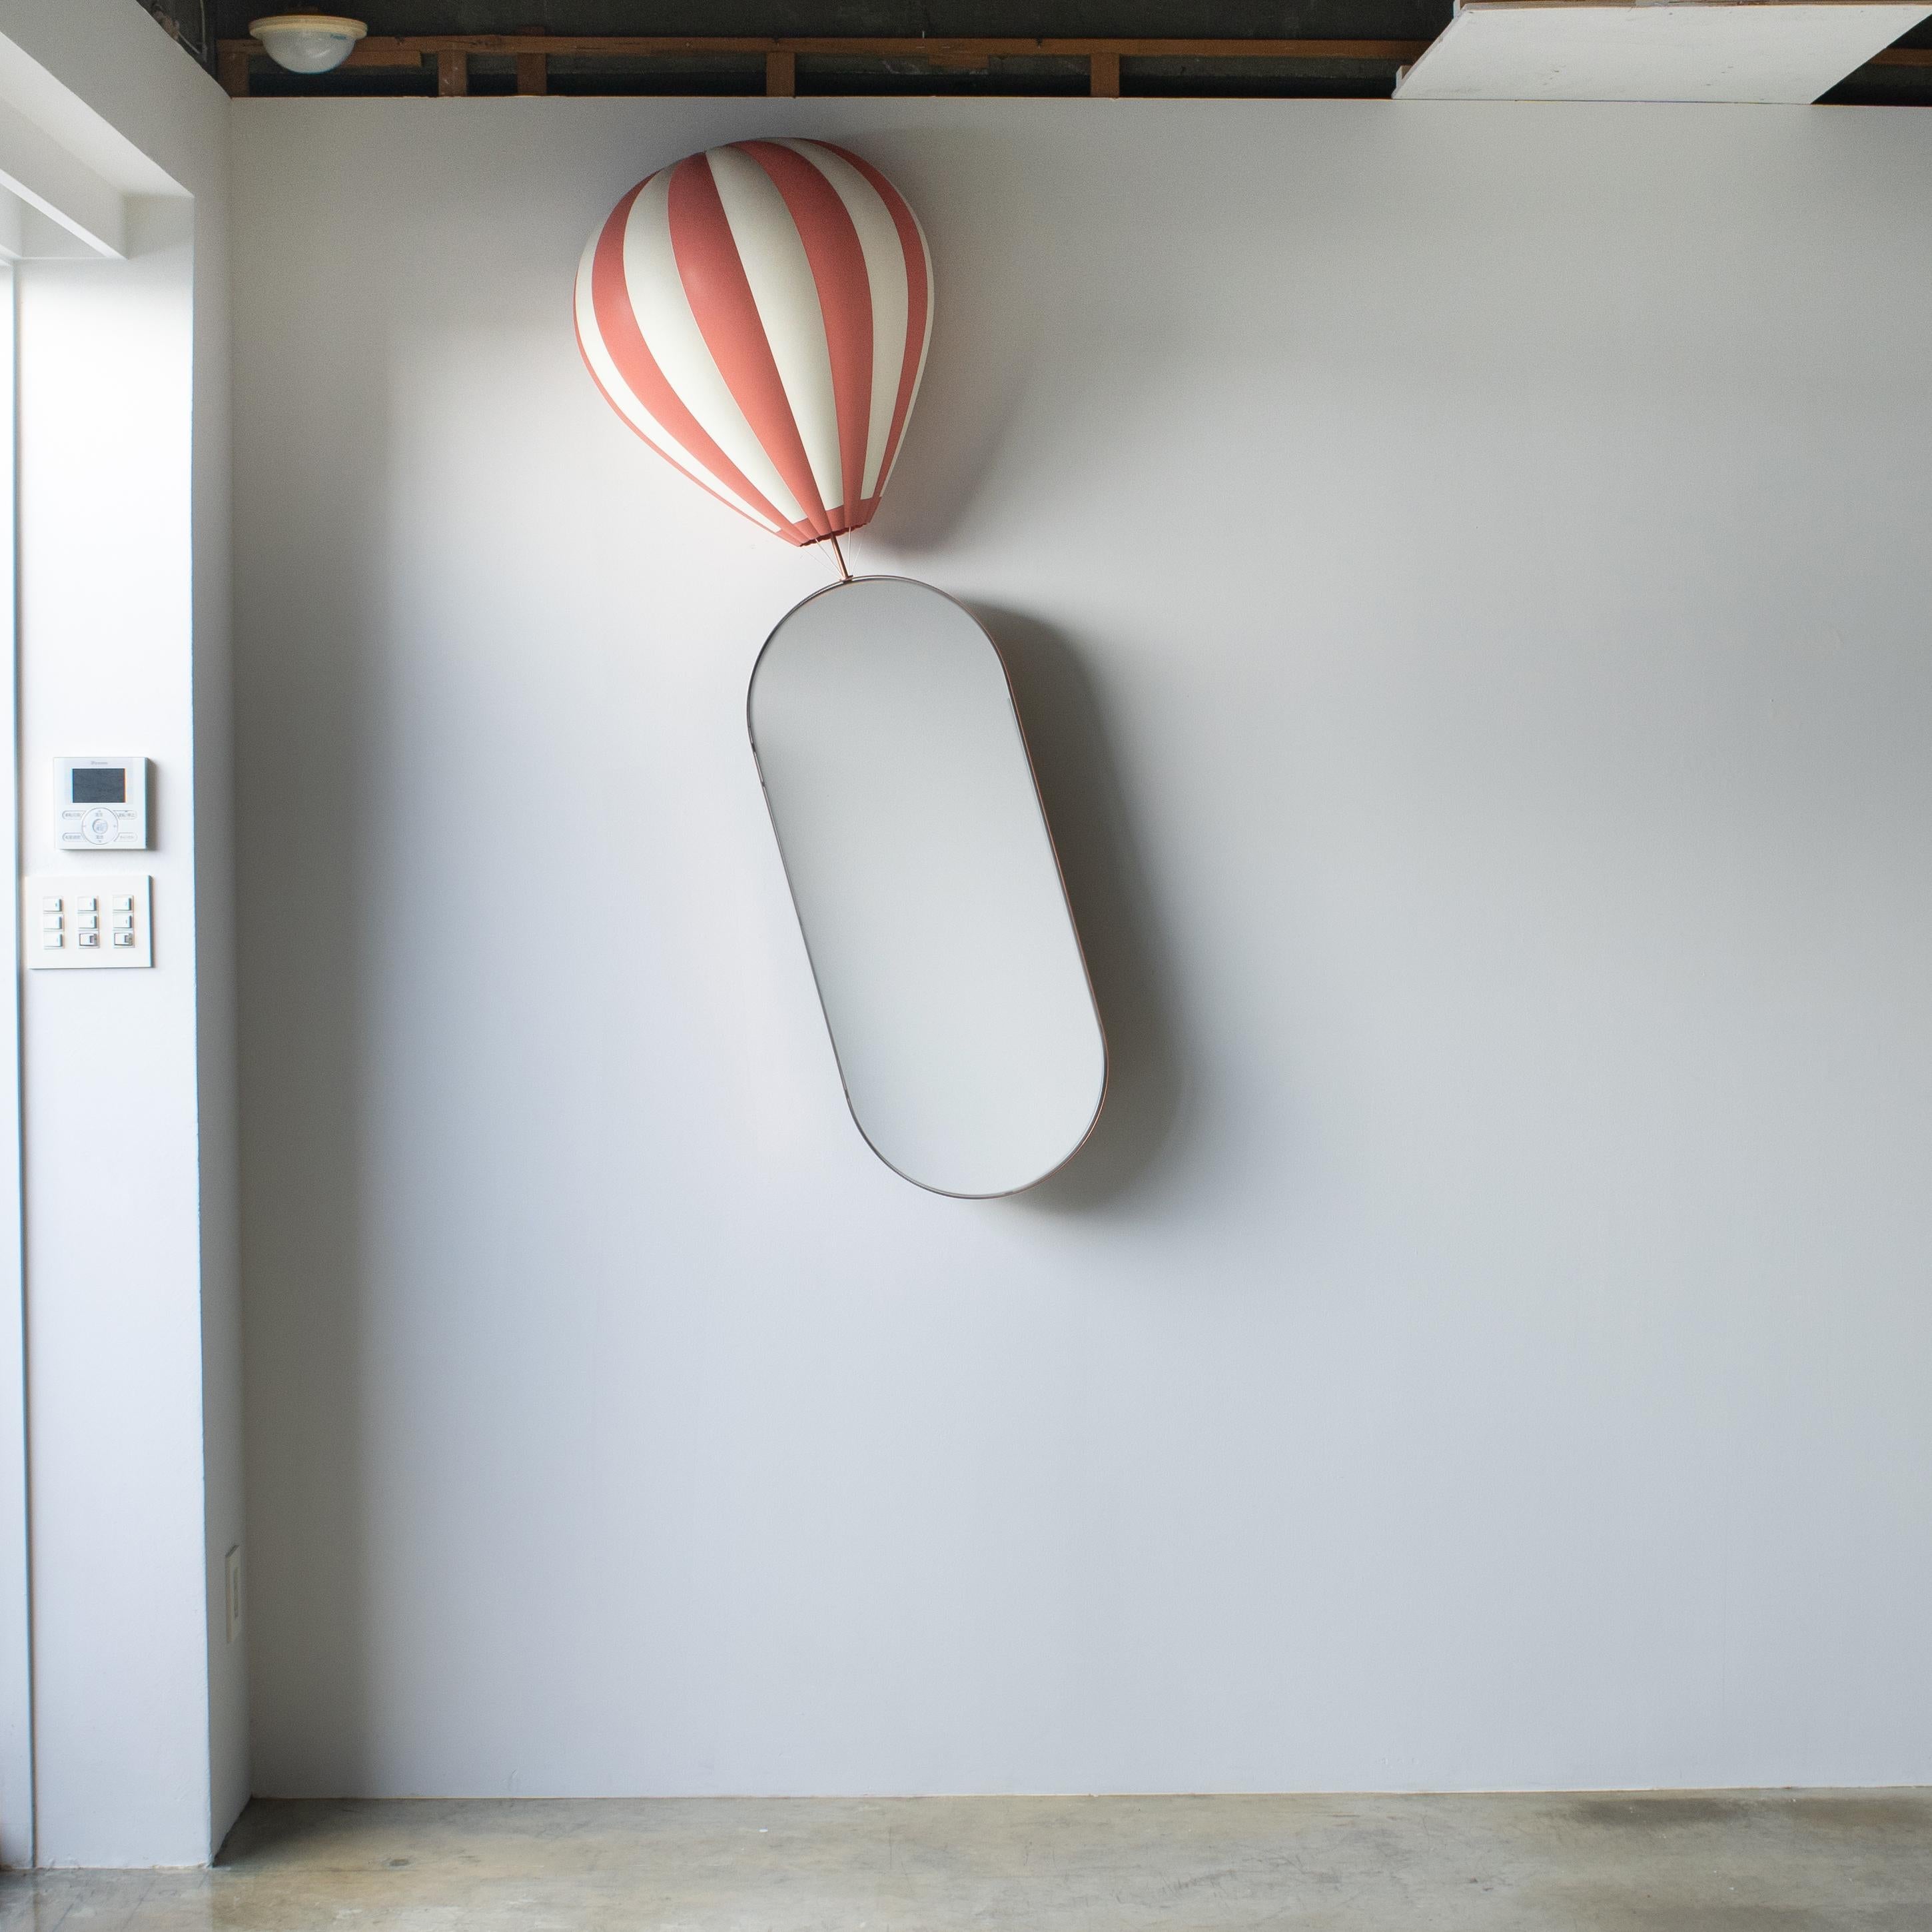 Balloon wall mirror designed by h220430, Satoshi Itasaka. 
Balloon is made of ABS plastic. Mirror base is made of steel. In the image, the mirror is slightly tilted. It can be installed with free angle such as vertically.
Cute and fantastic mirror. 